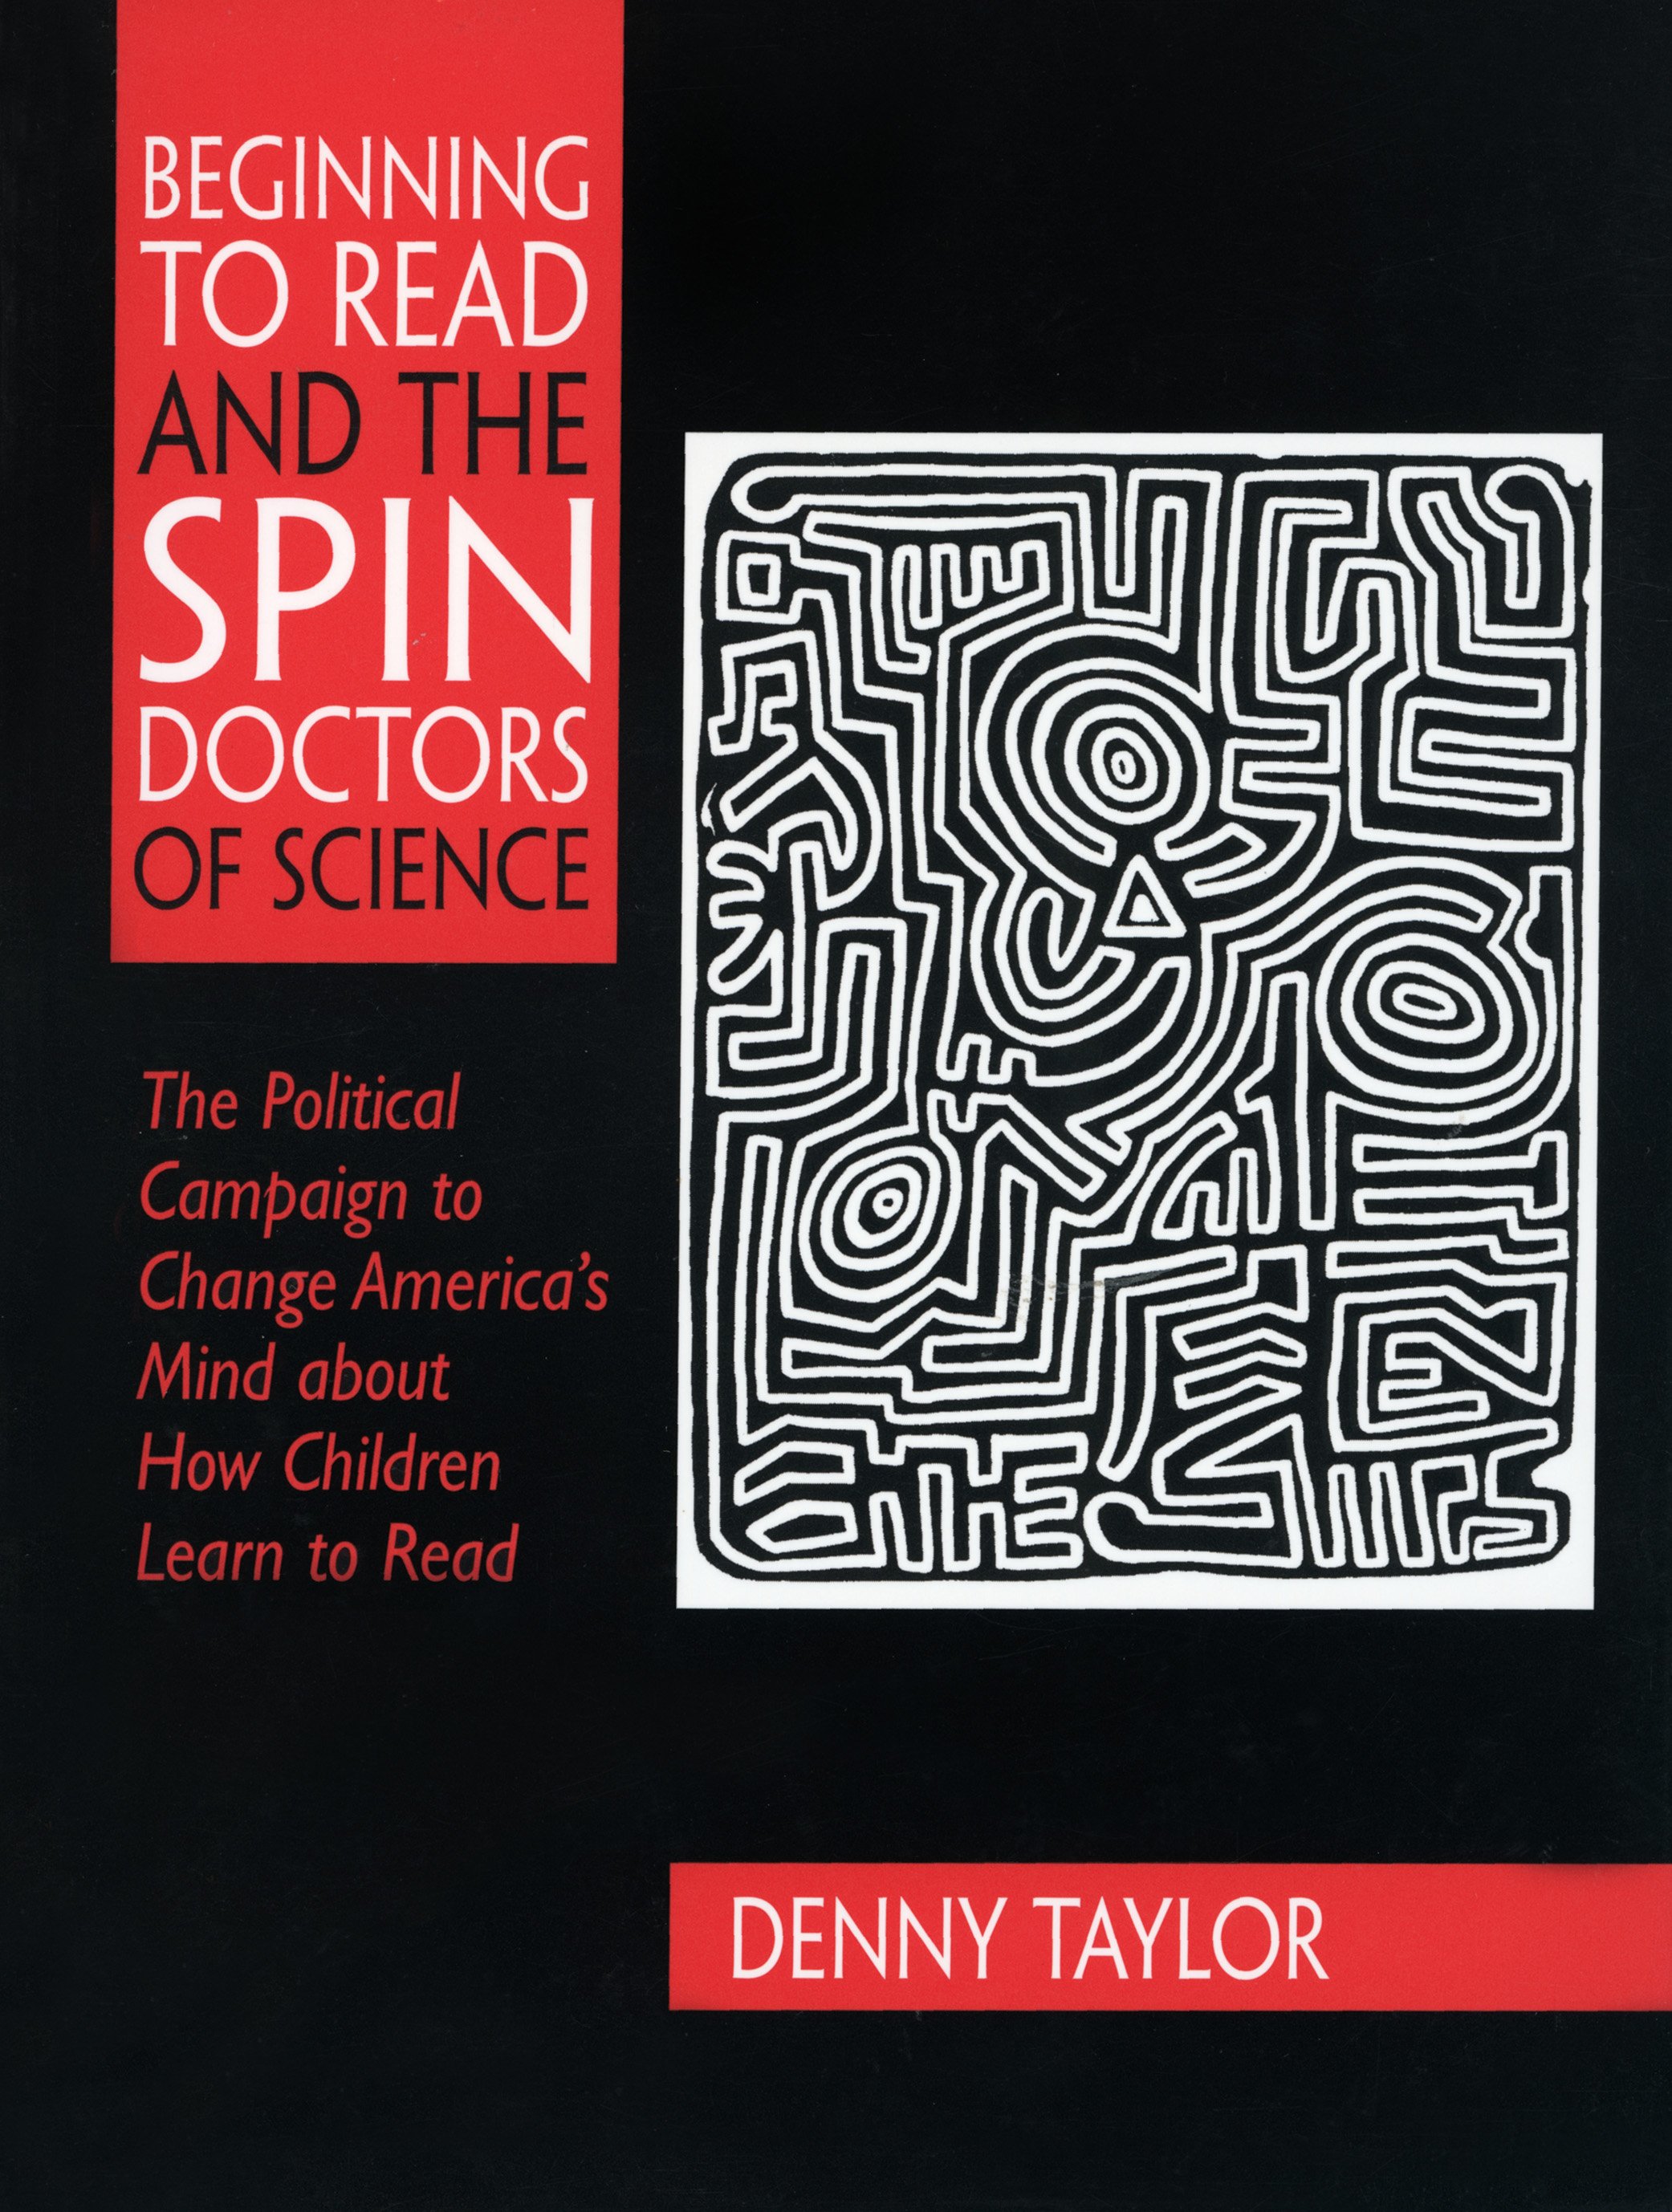 Download: Beginning to Read and the Spin Doctors of Science